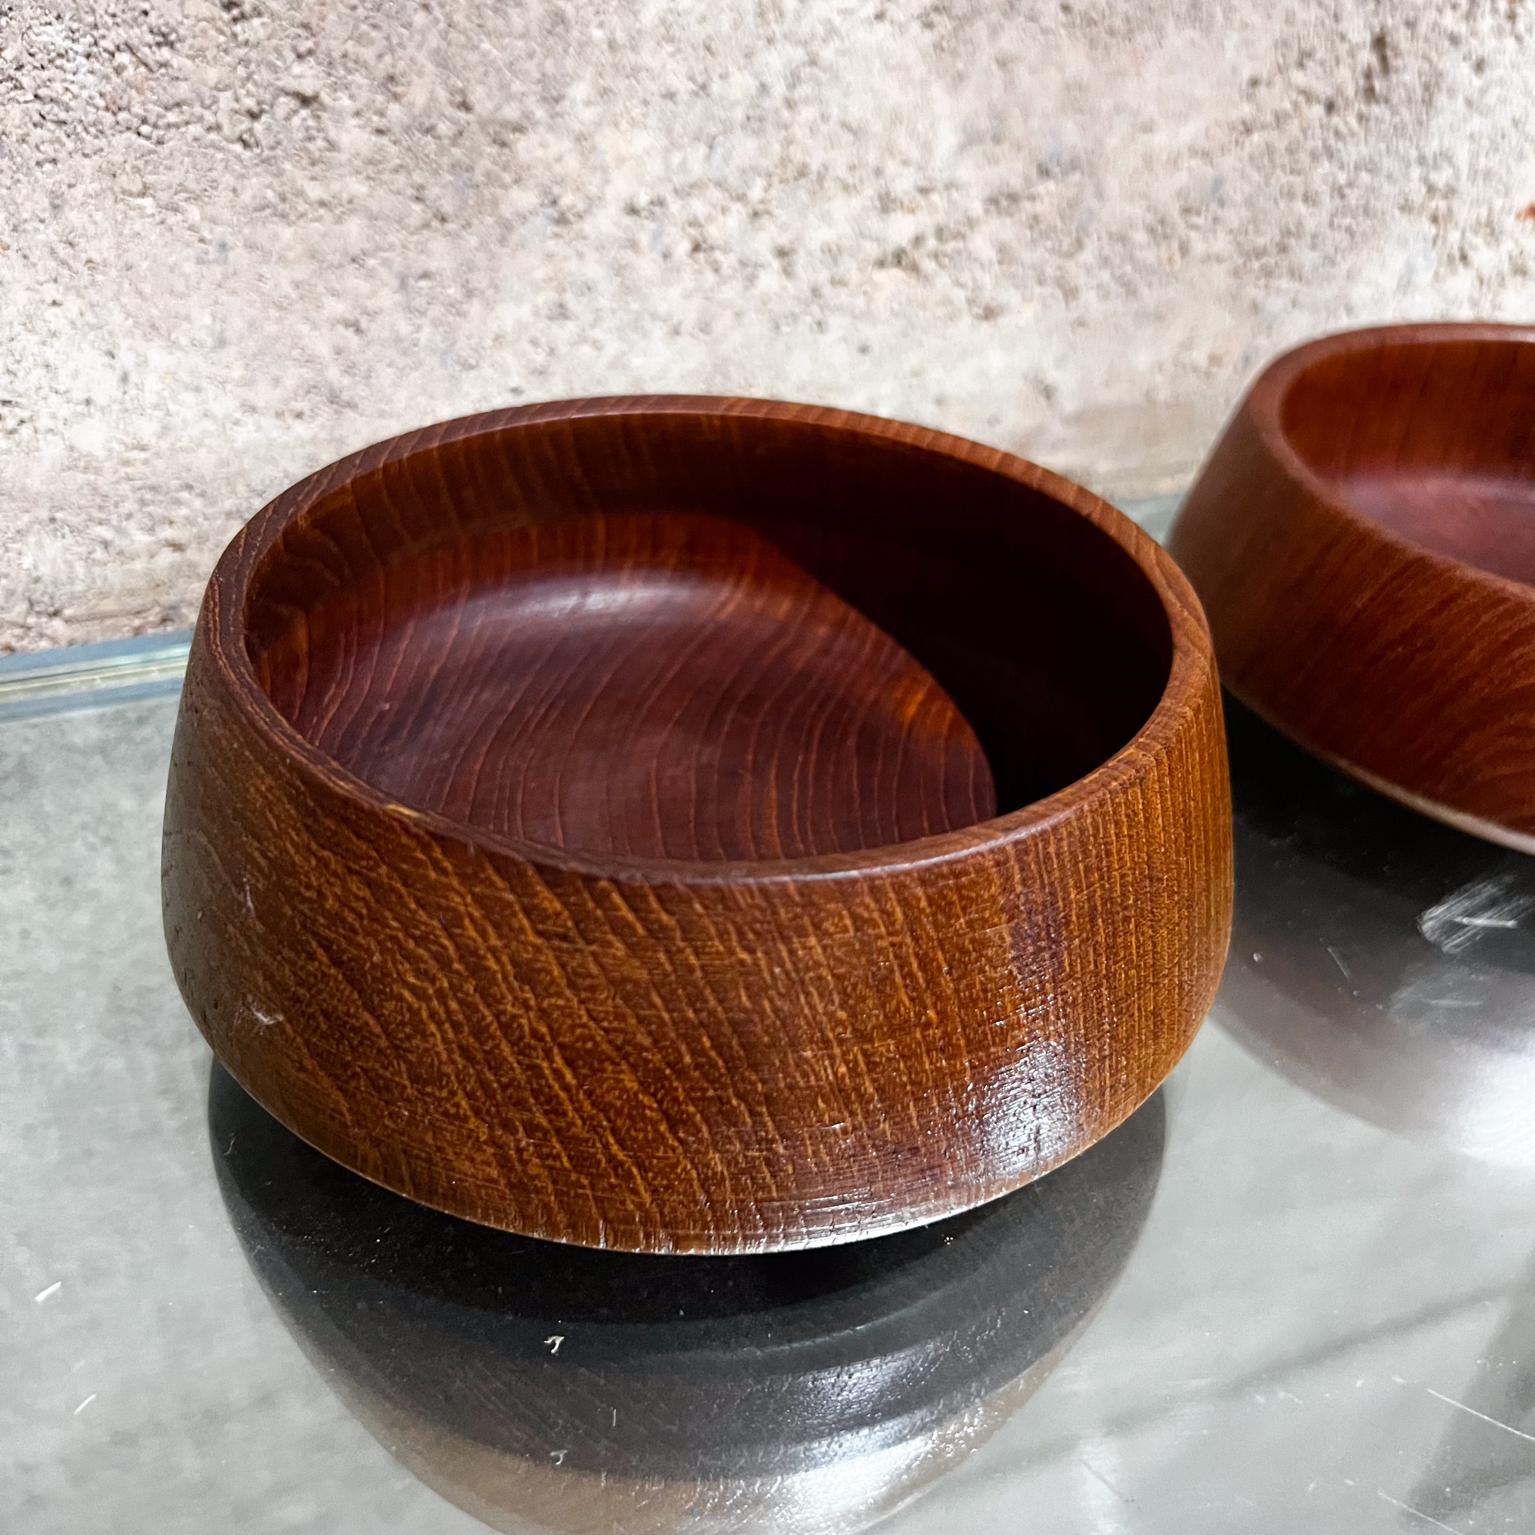 1960s Pair of Teak Wood Bowls After Dansk Designs Jens Quistgaard In Good Condition For Sale In Chula Vista, CA